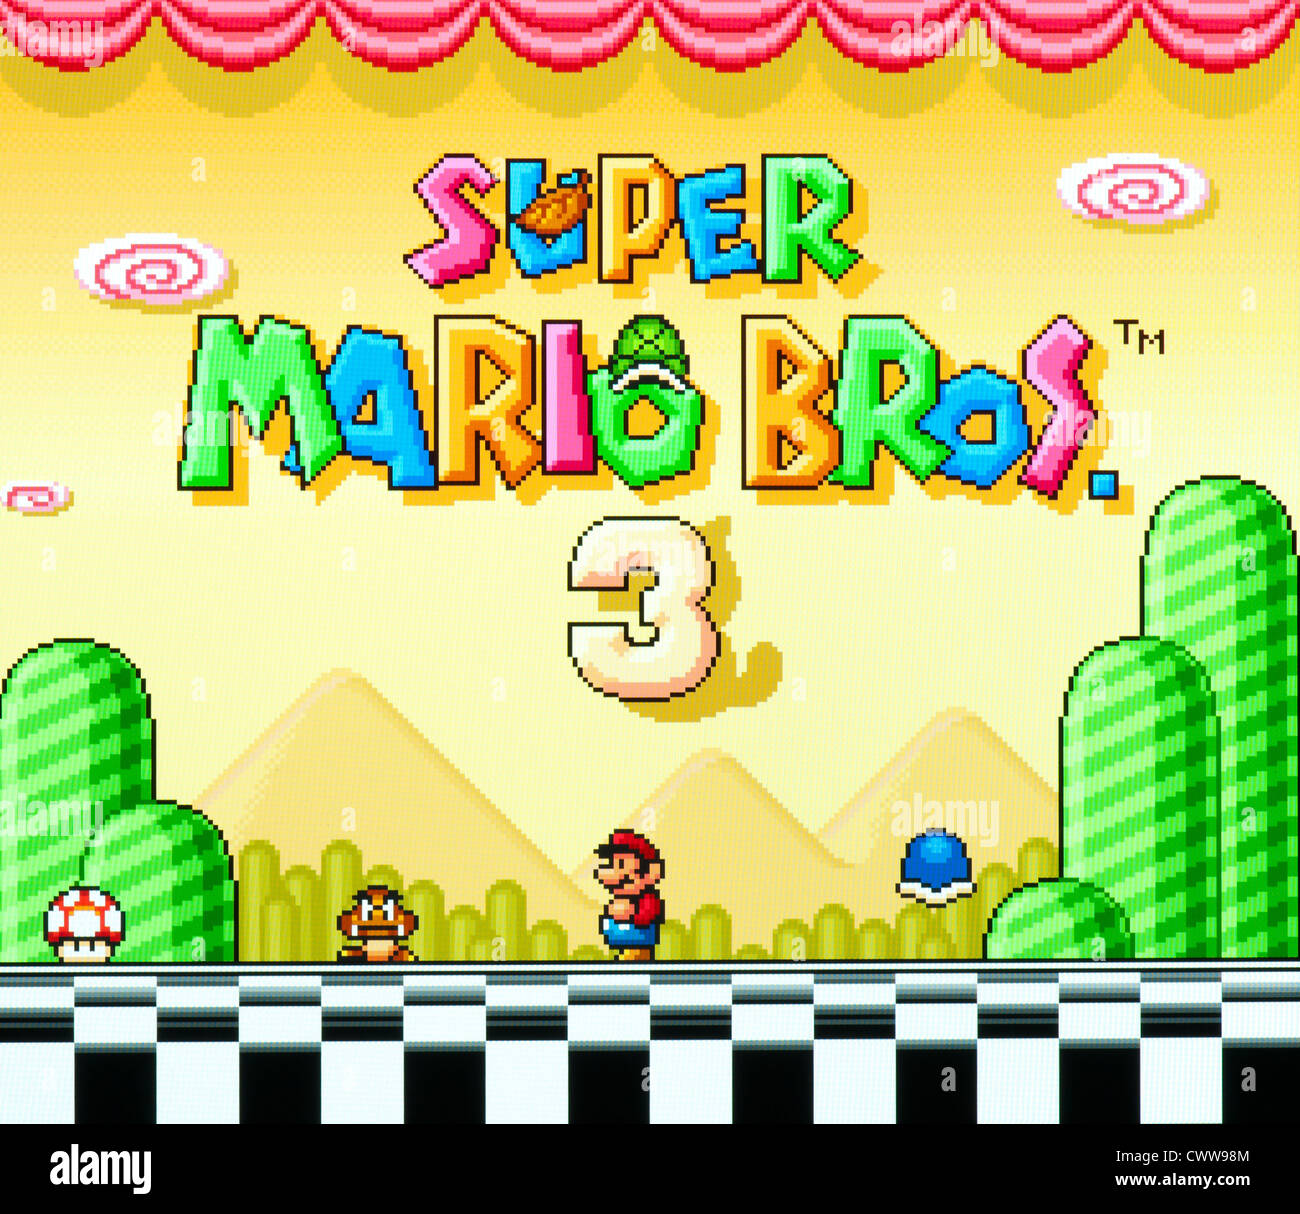 631 Mario Brothers Images, Stock Photos, 3D objects, & Vectors